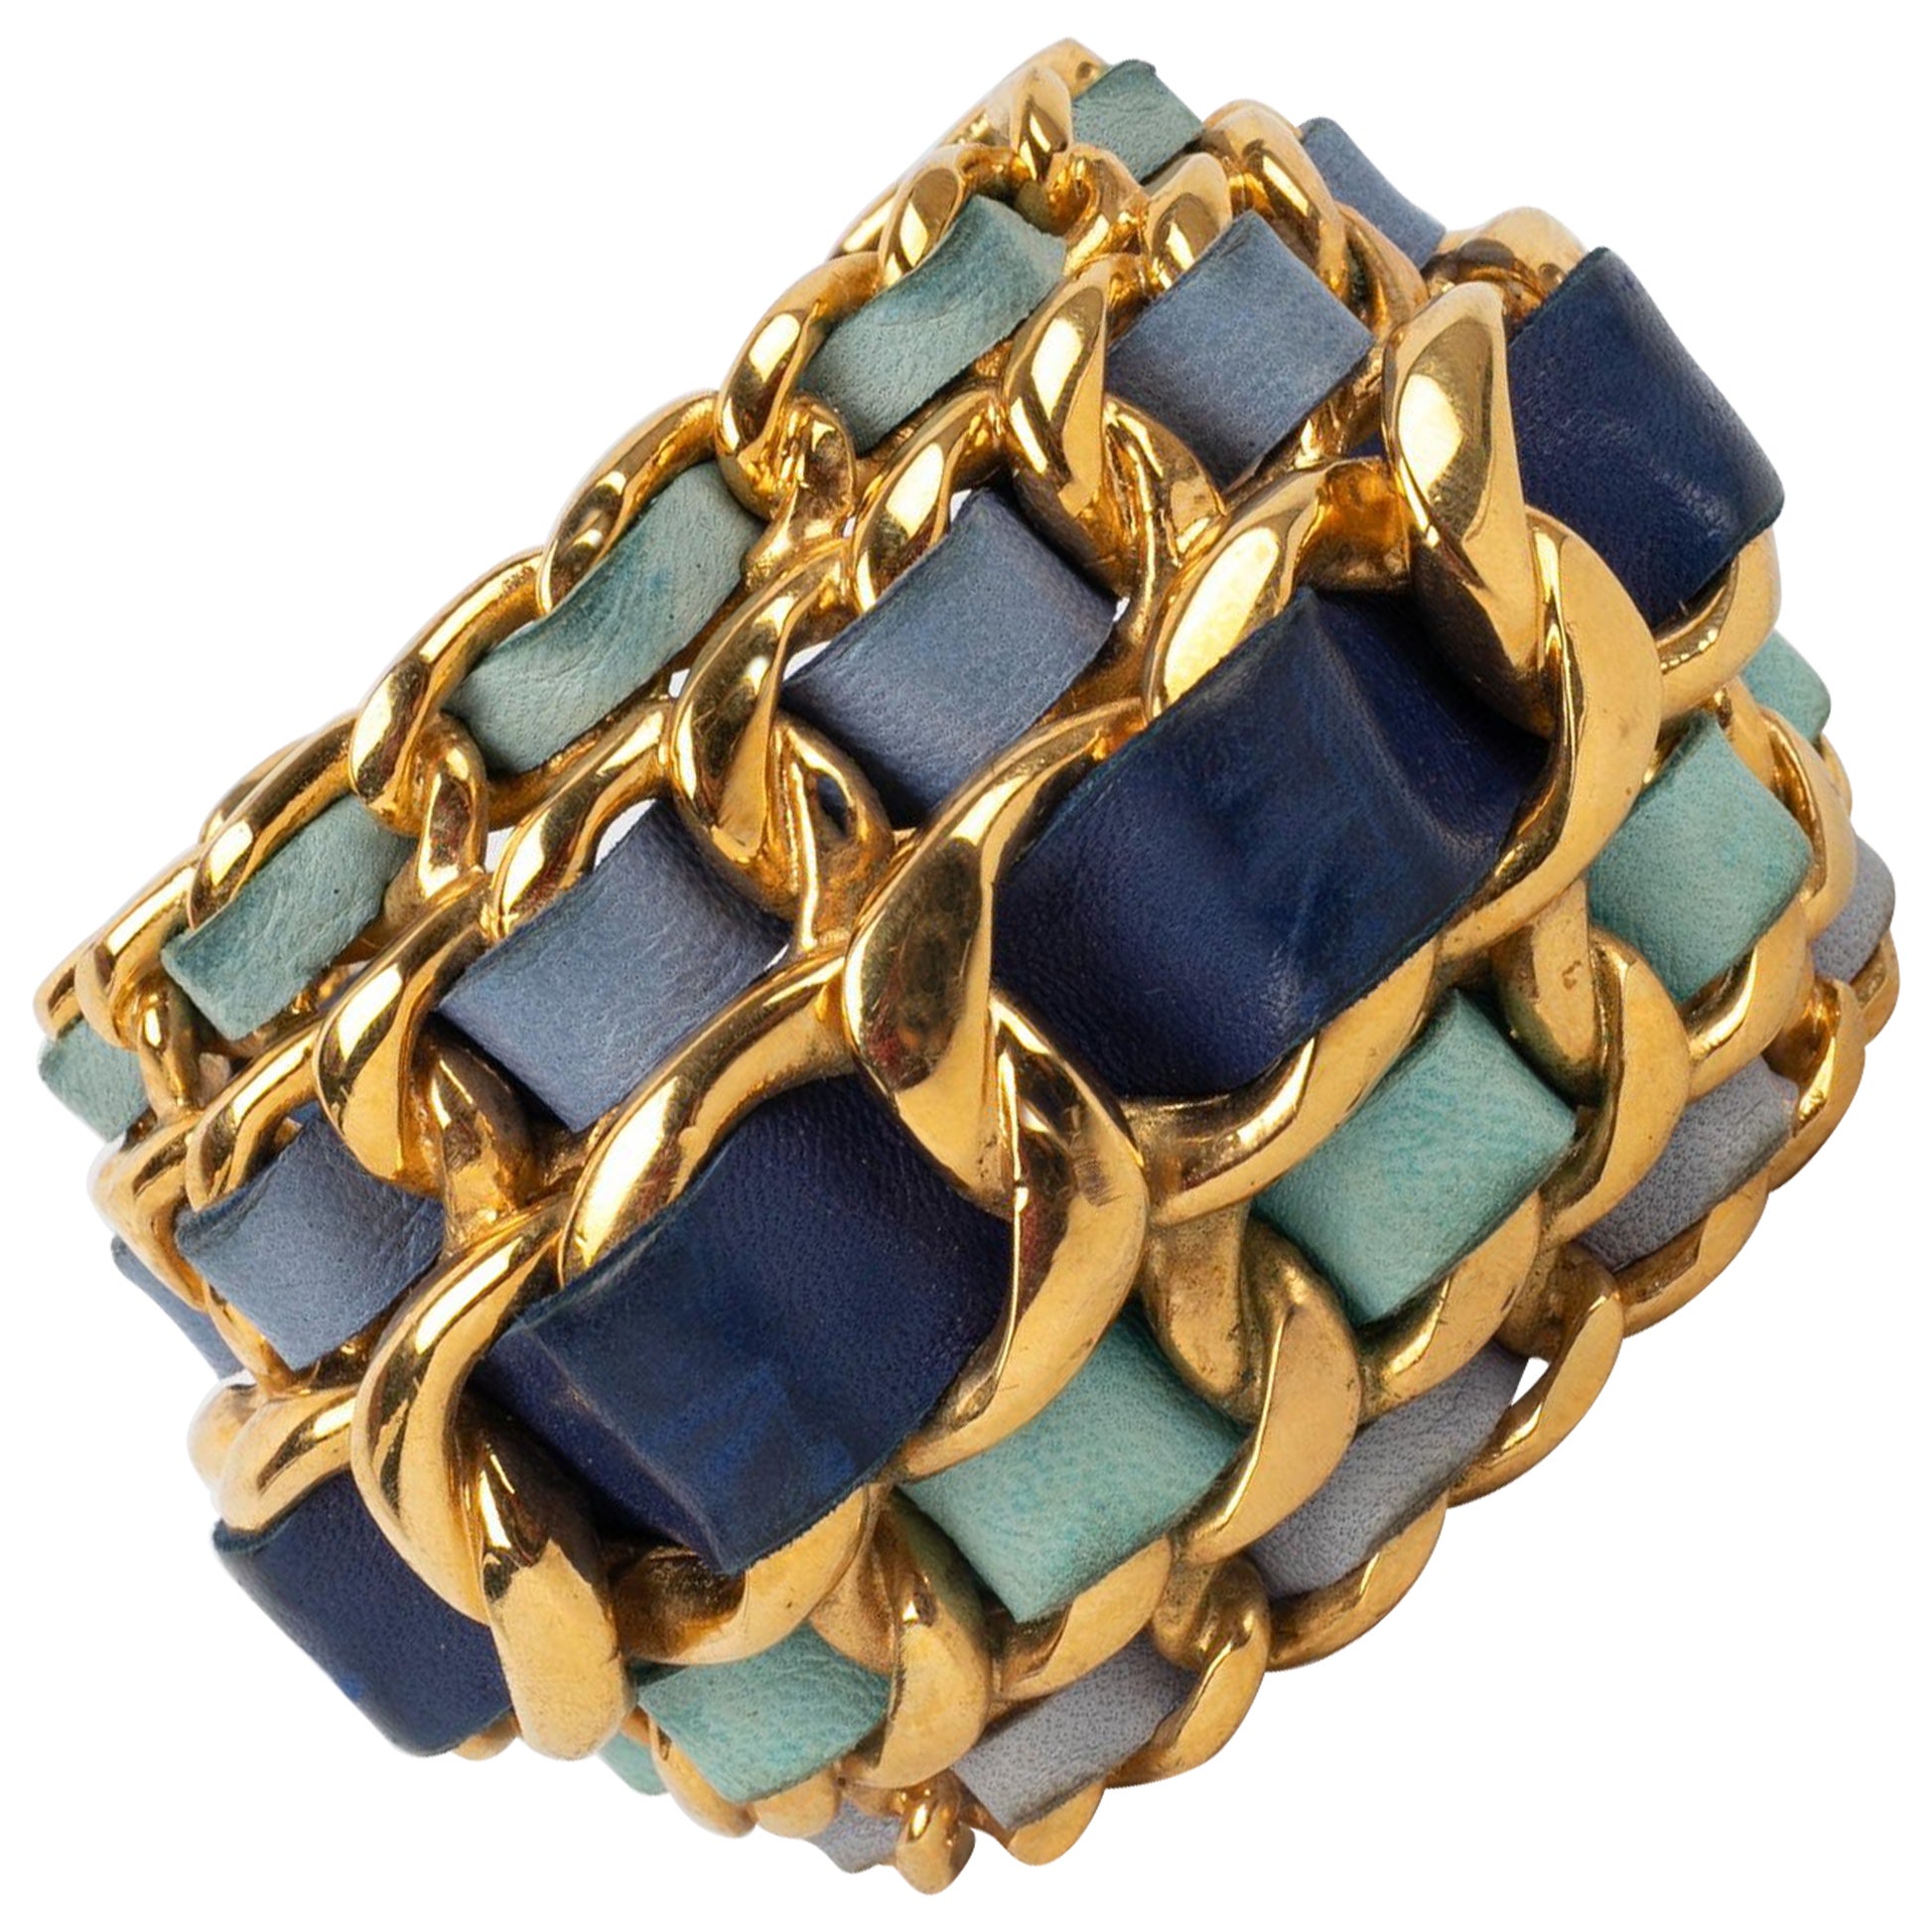 Chanel Cuff Bracelet in Golden Metal Interlaced with Blue Tone Leather, 1991 For Sale